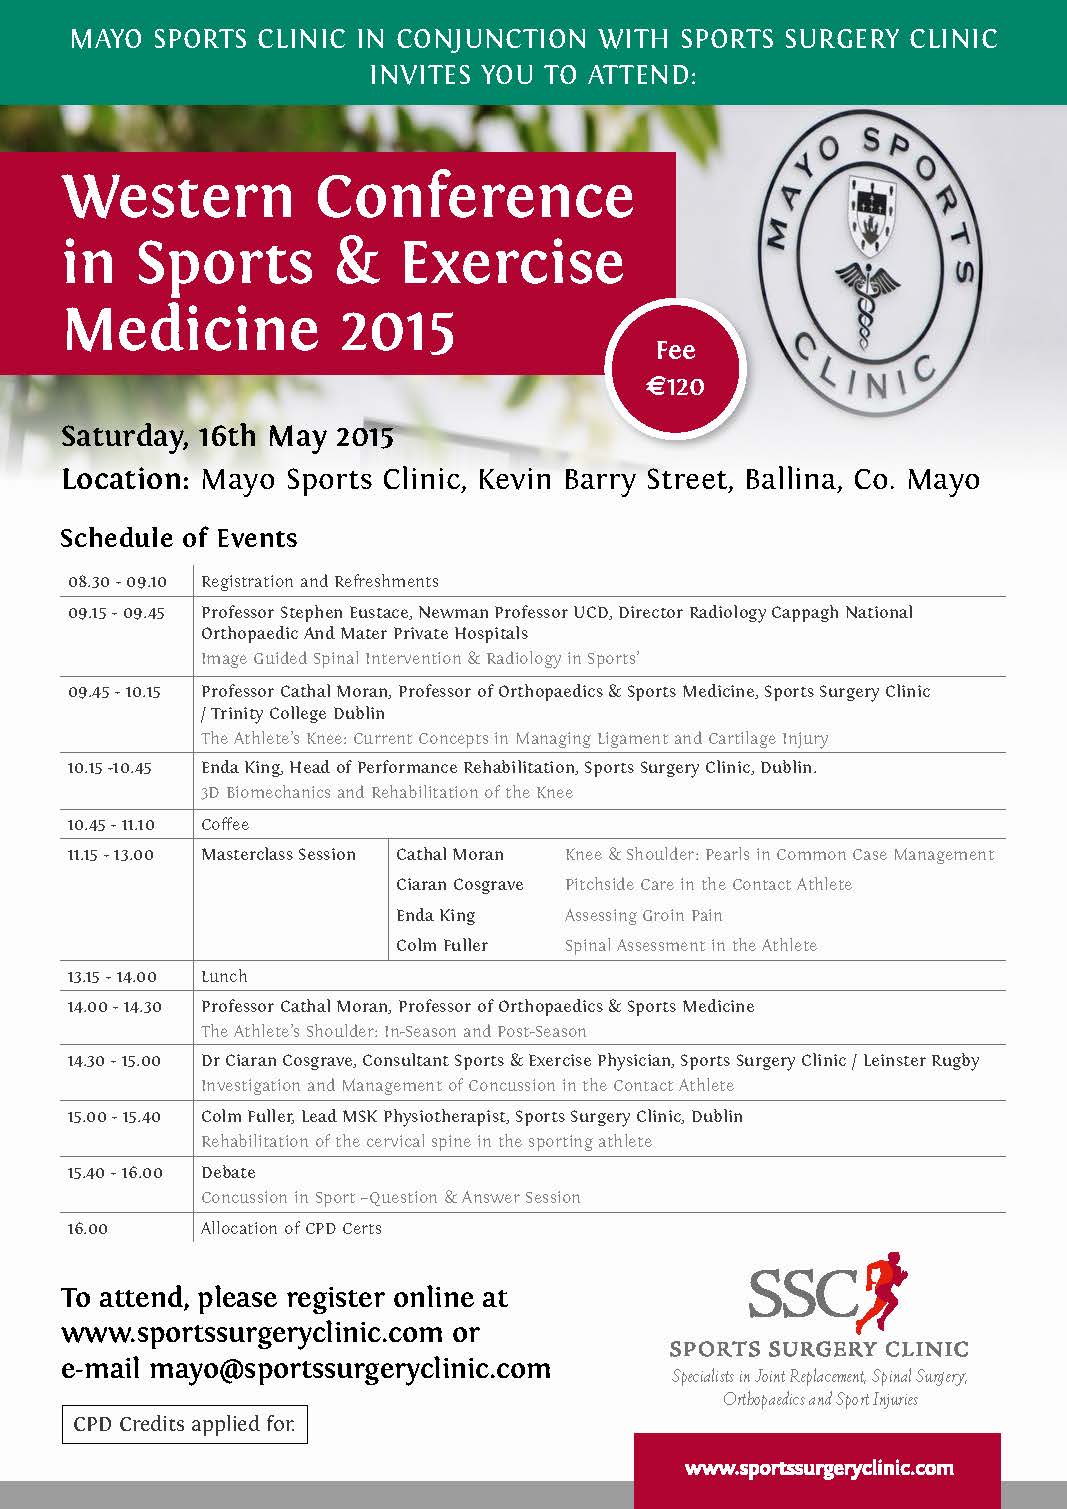 programme schedule for western conference in sports and exercise medicine